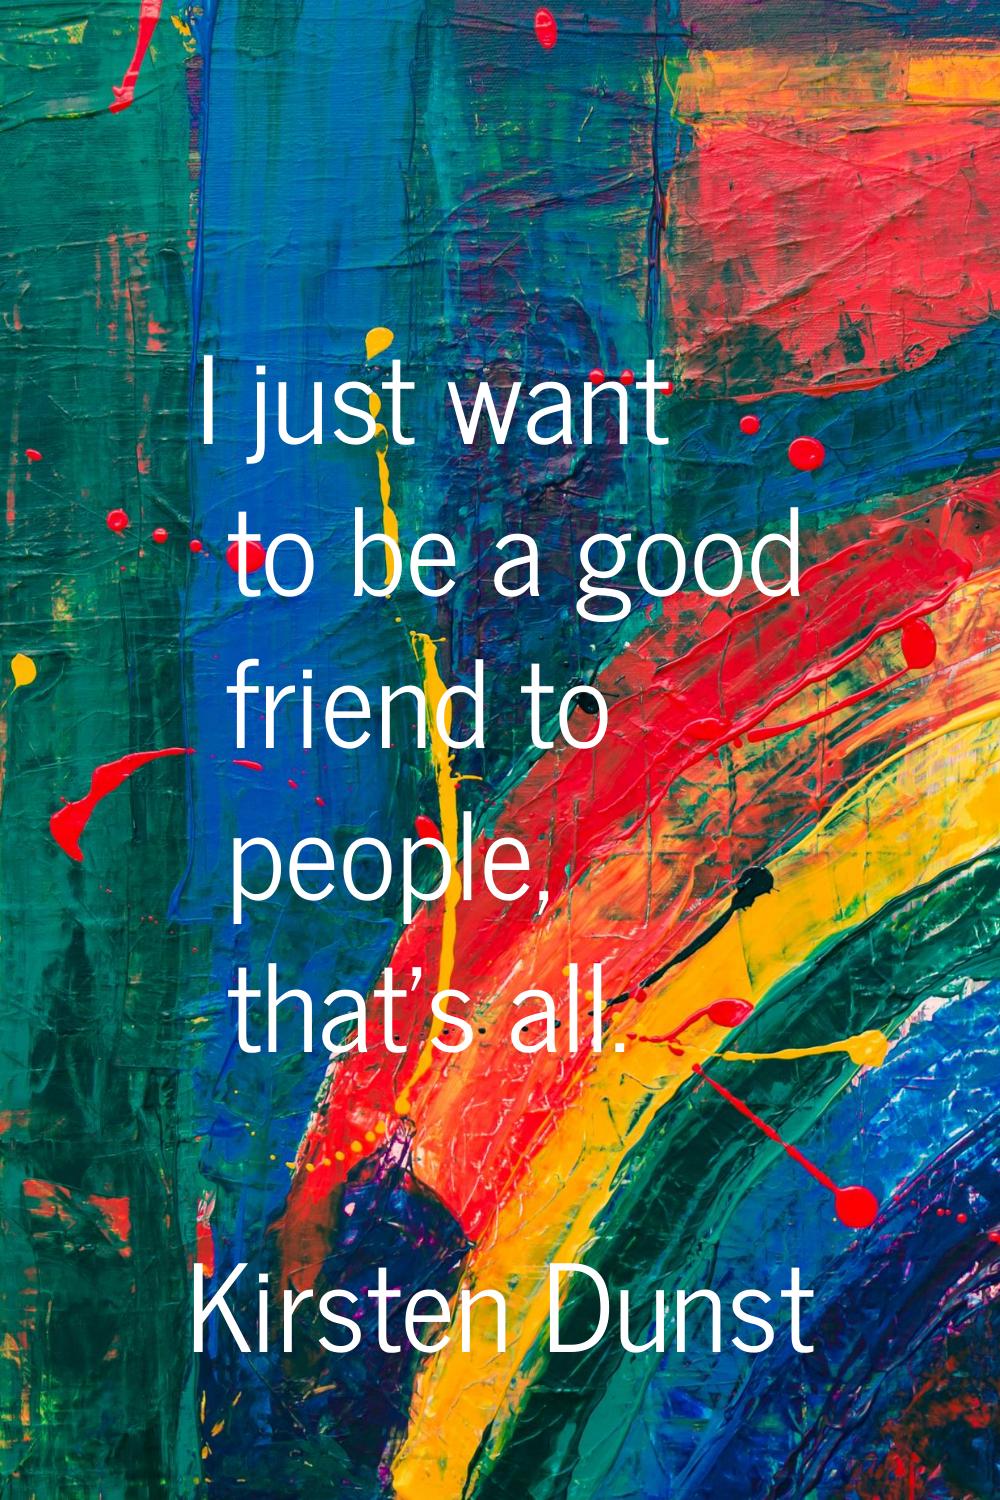 I just want to be a good friend to people, that's all.